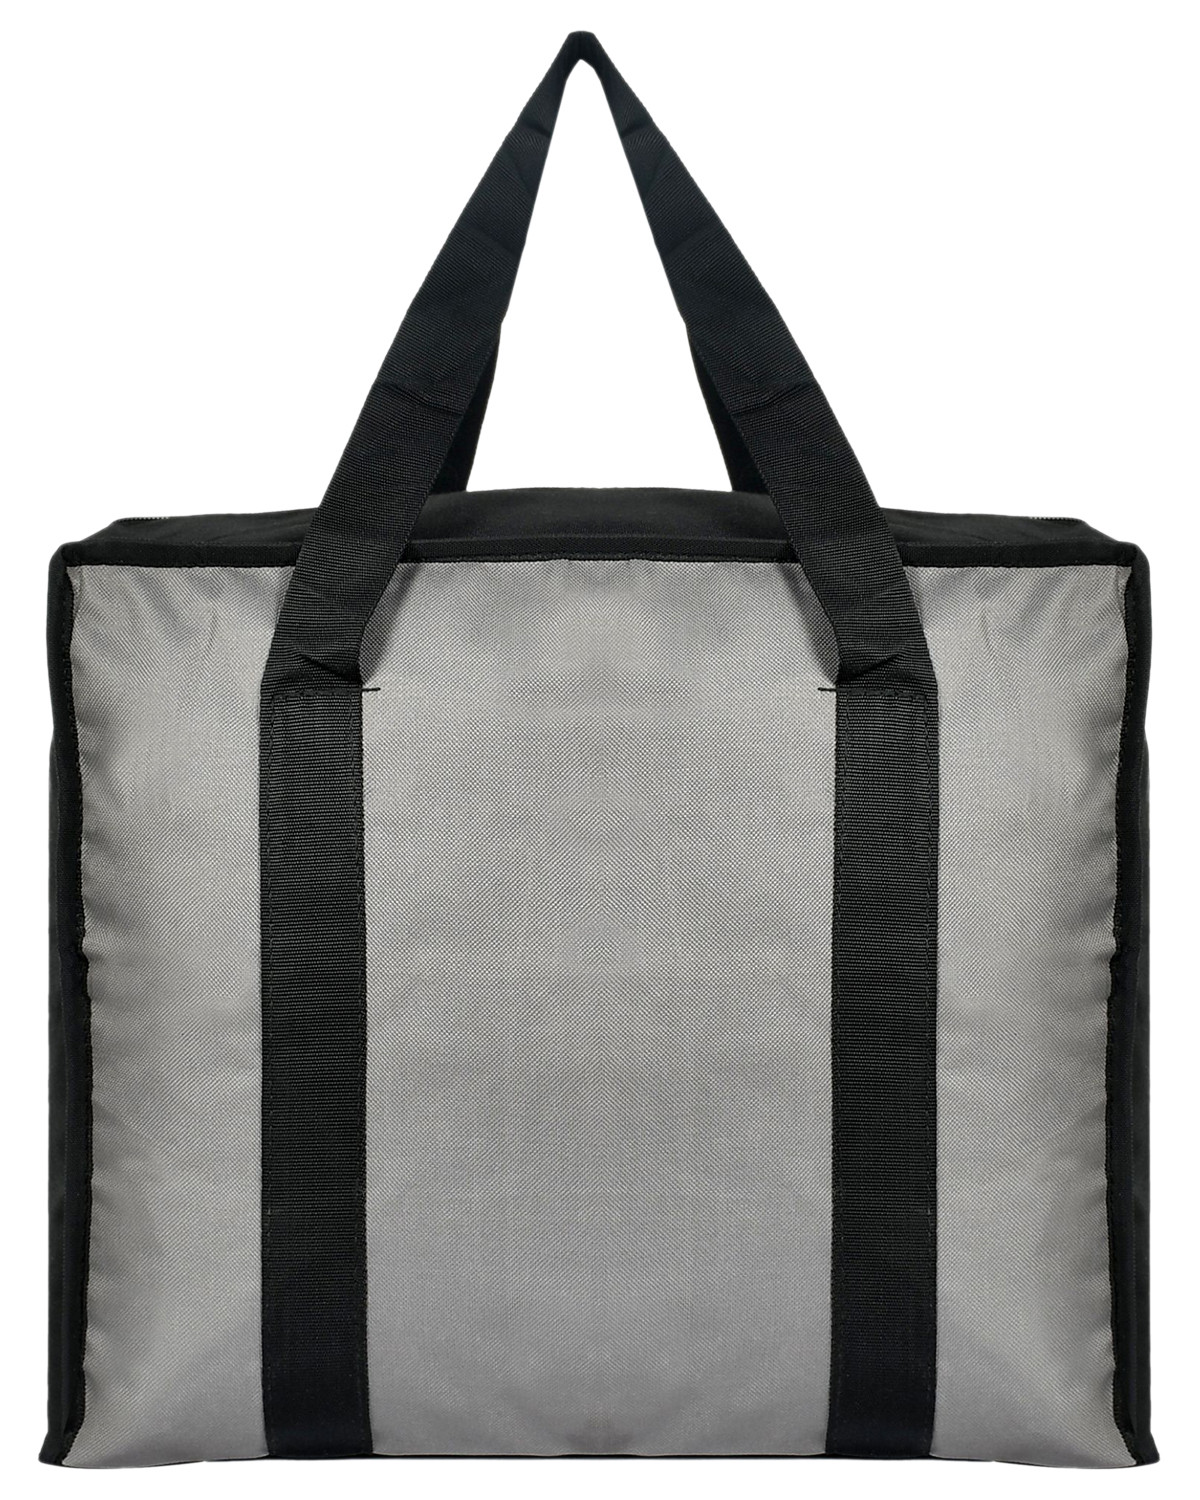 Kuber Industries Rexine Shopping Bags/Grocery Bag for Carry Grocery, Fruits, Vegetable with Handles (Grey) 54KM4017